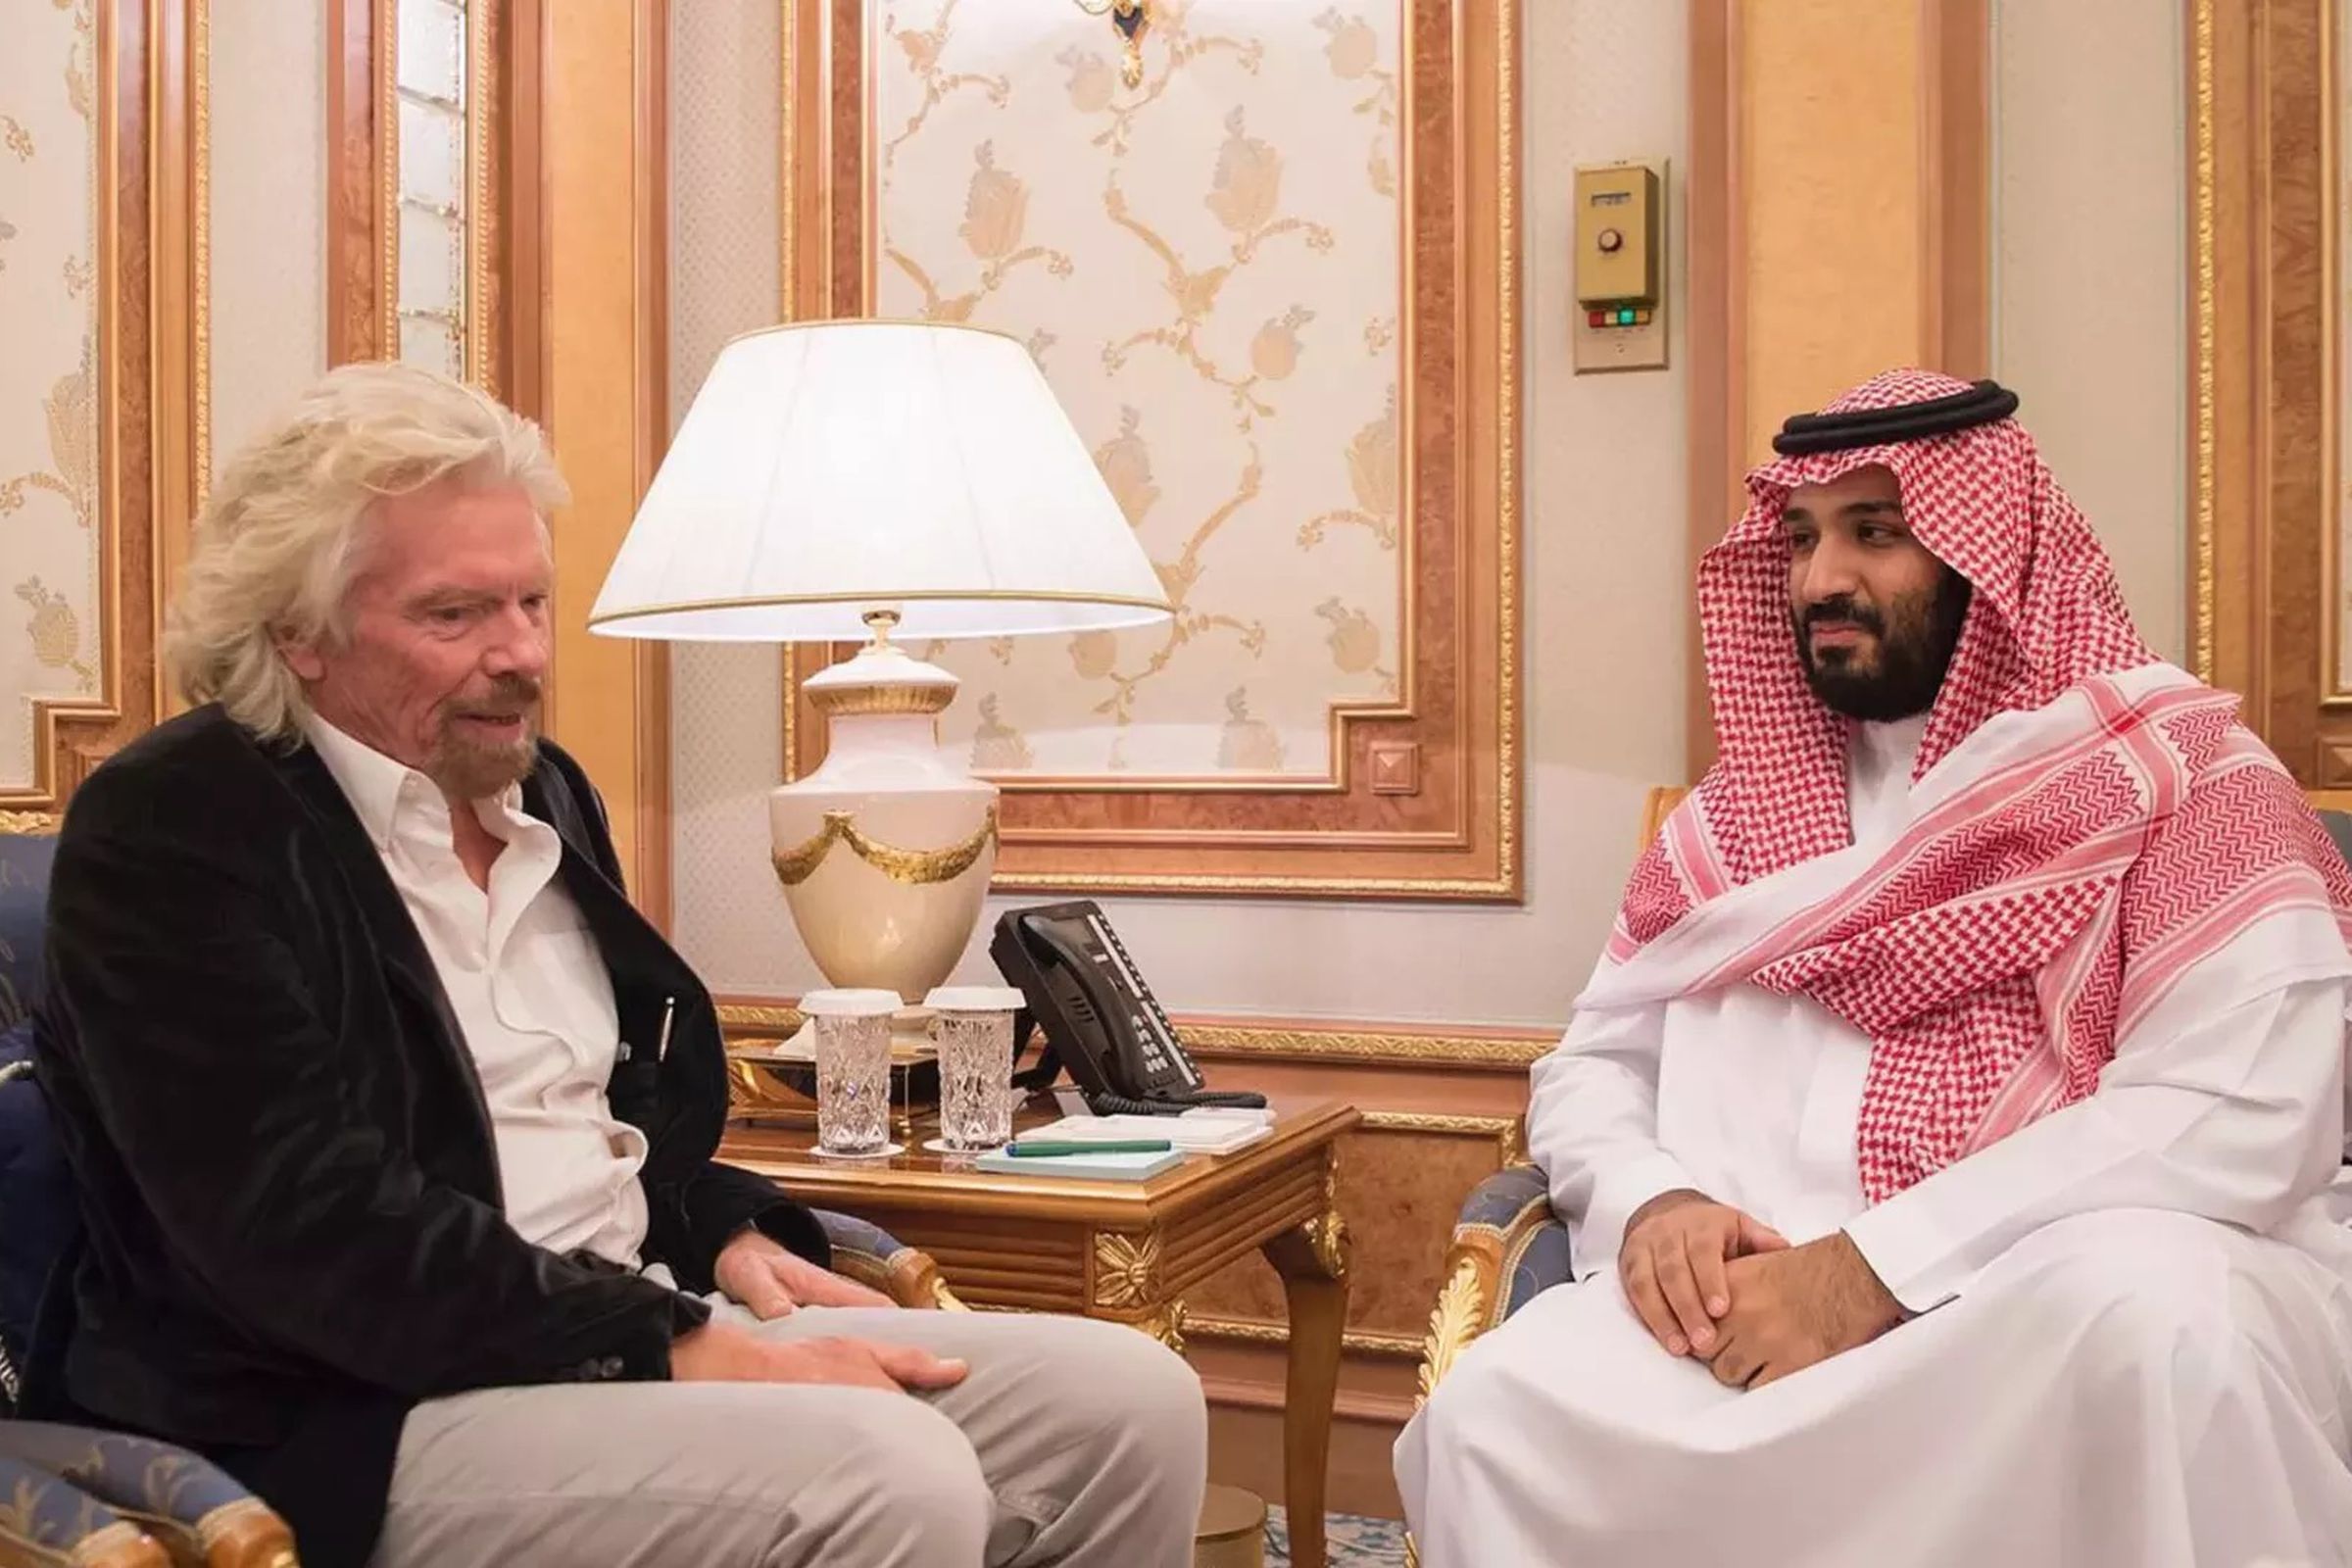 Richard Branson meeting with Prince Mohammad, released during the original announcement in October last year